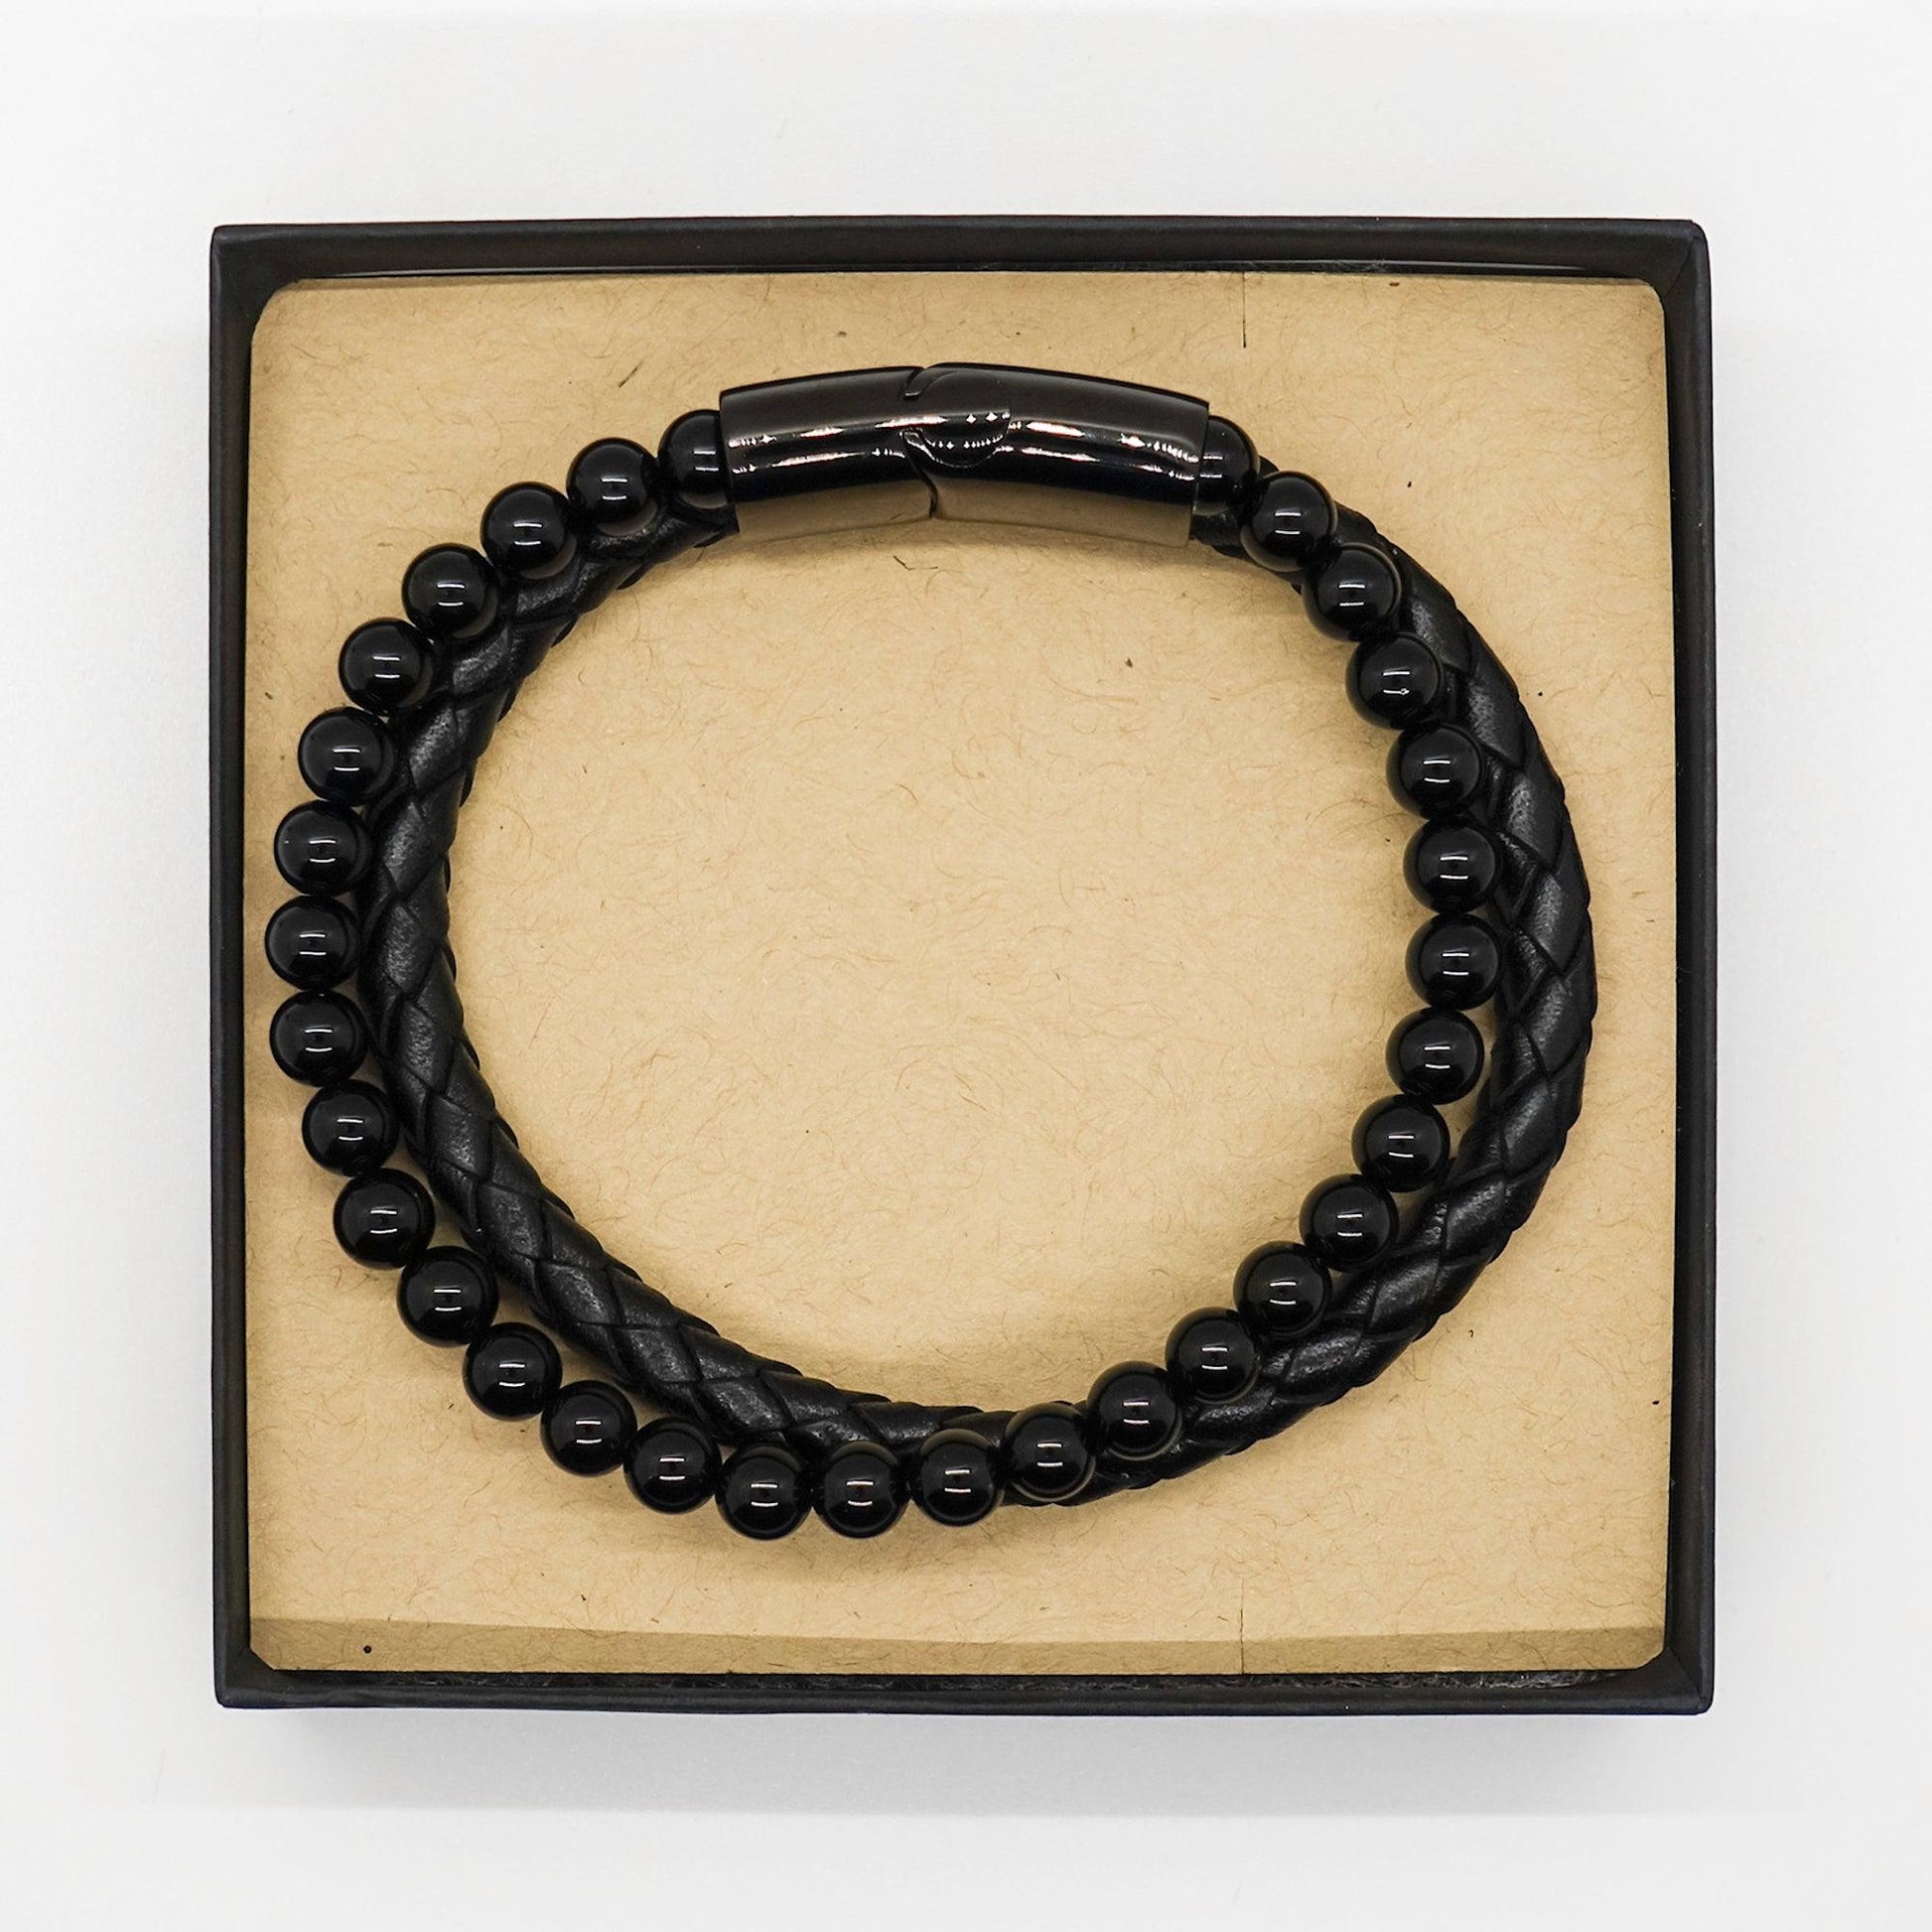 Carpenter Black Braided Stone Leather Bracelet - Thanks for being who you are - Birthday Christmas Jewelry Gifts Coworkers Colleague Boss - Mallard Moon Gift Shop